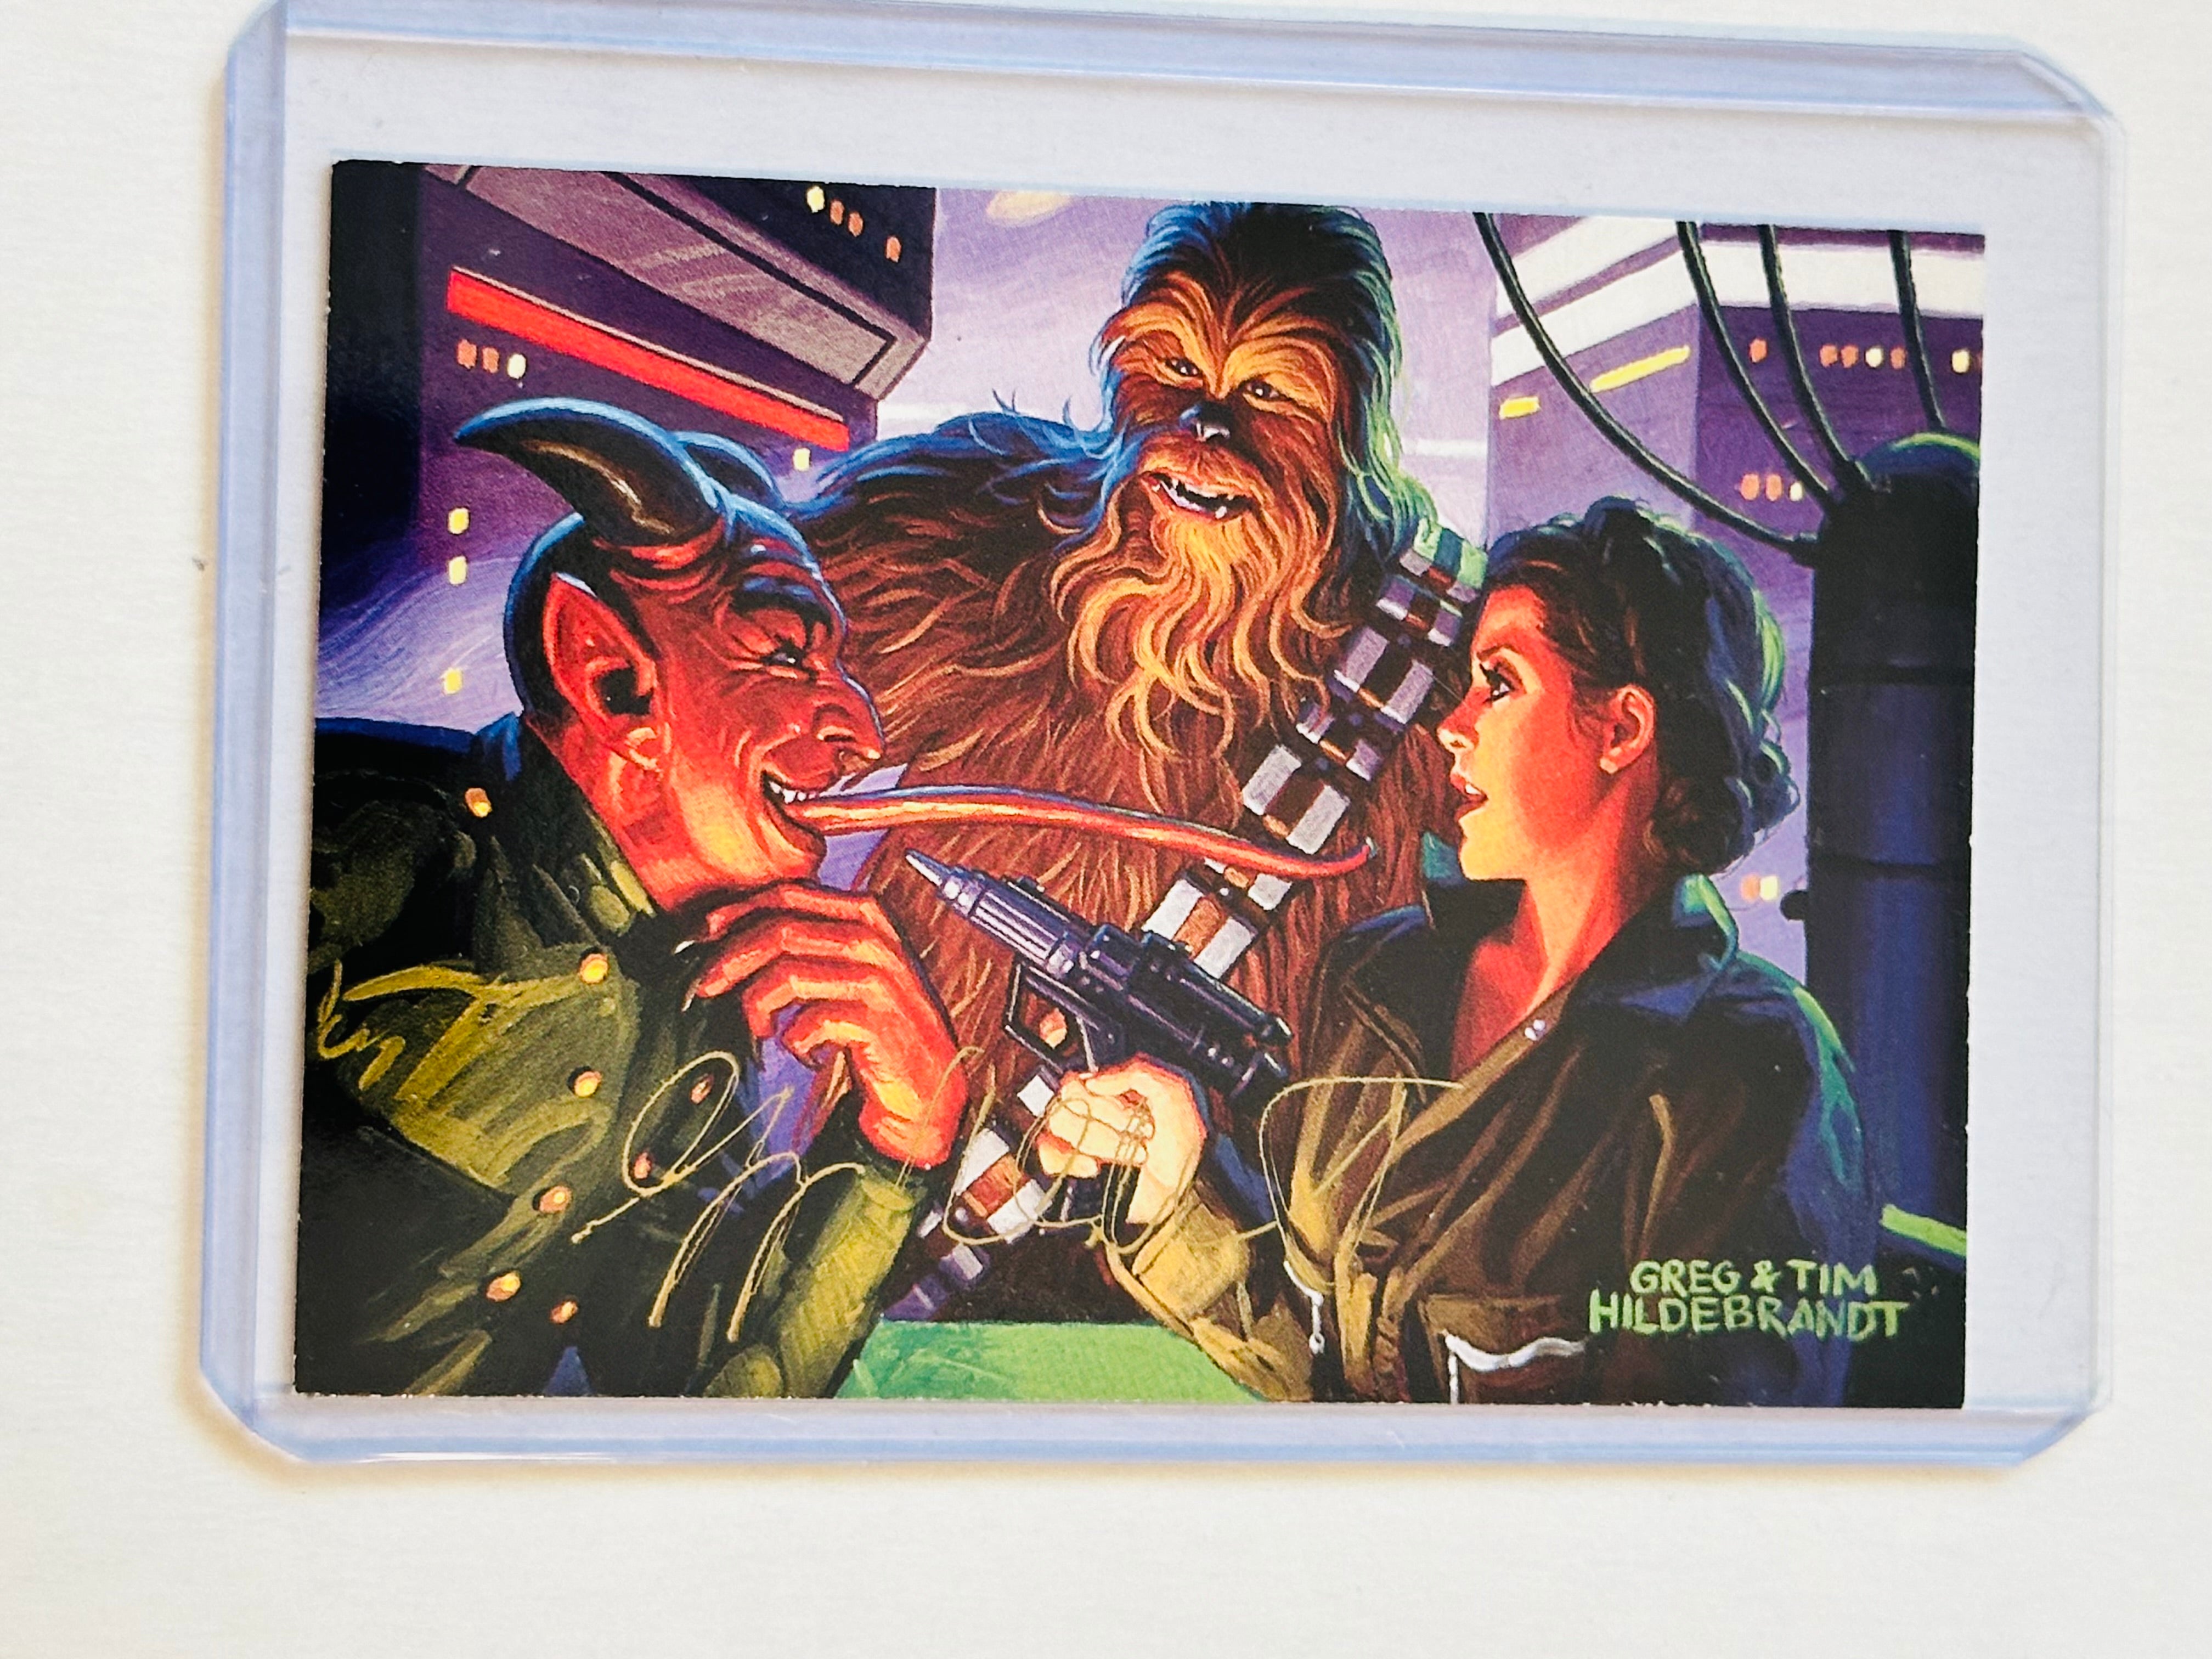 Star Wars Greg and Tim Hildebrandt double autographed sign in person card will COA